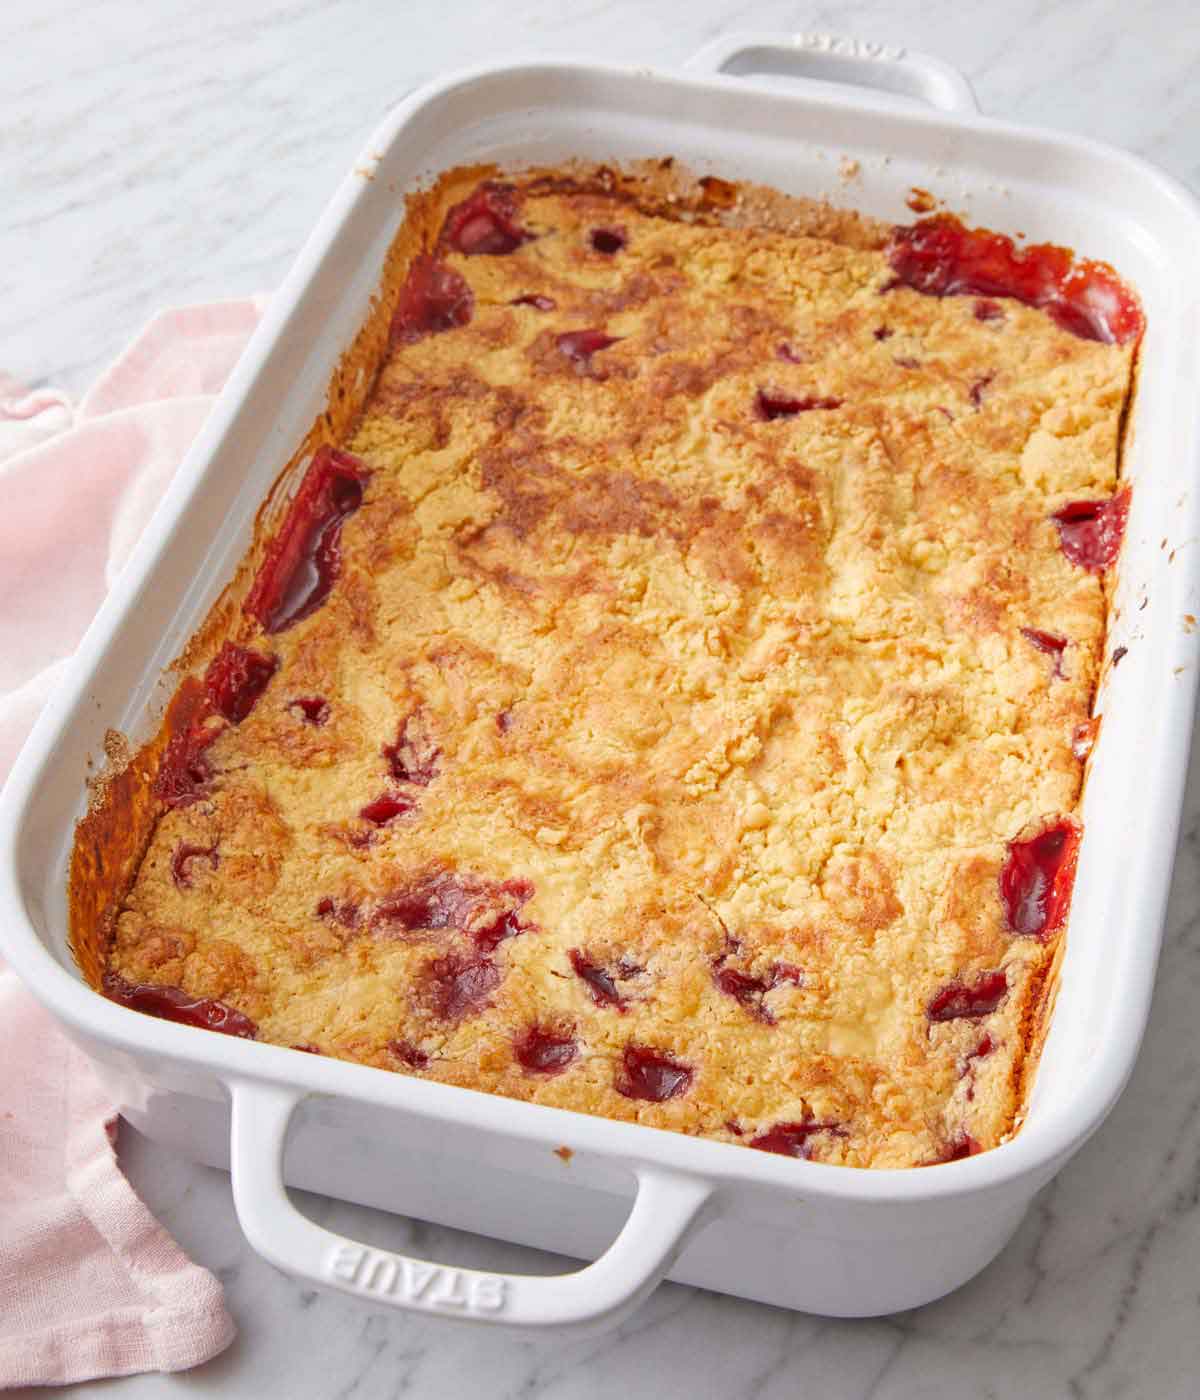 A dump cake inside of a white baking dish with a pink linen napkin on the side.